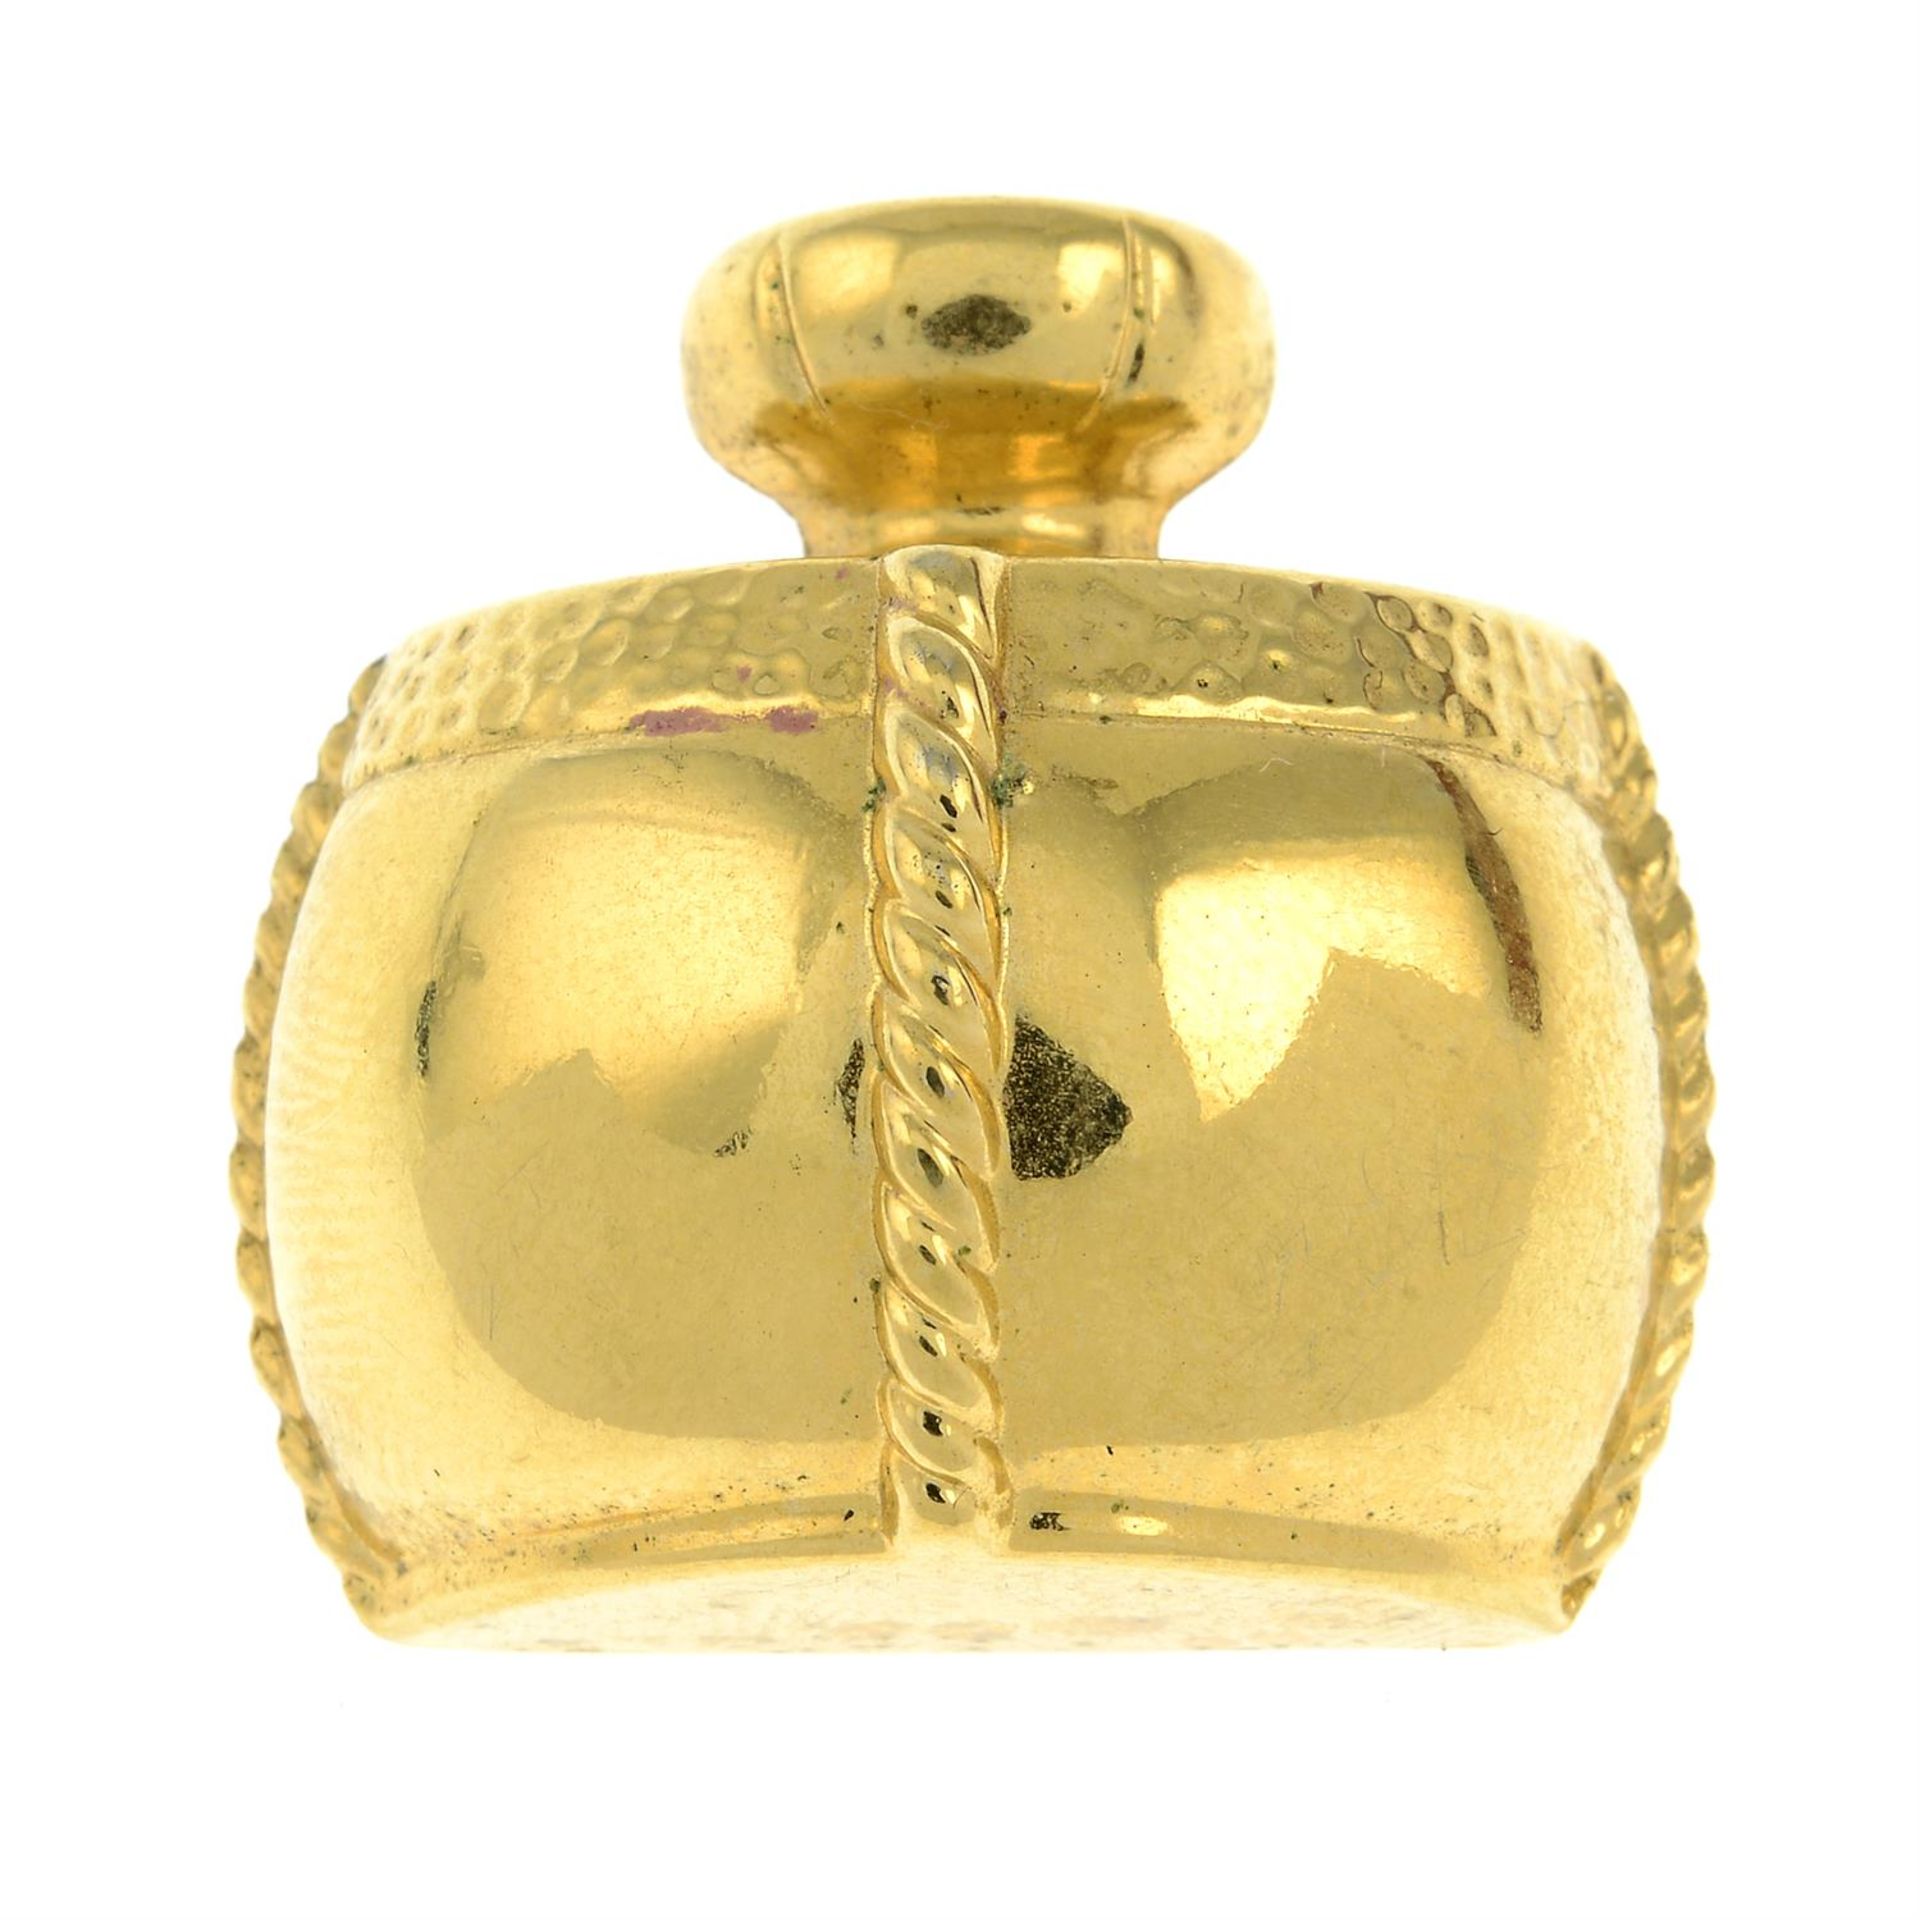 YVES SAINT LAURENT - a brooch, designed as a stylised champagne perfume bottle.